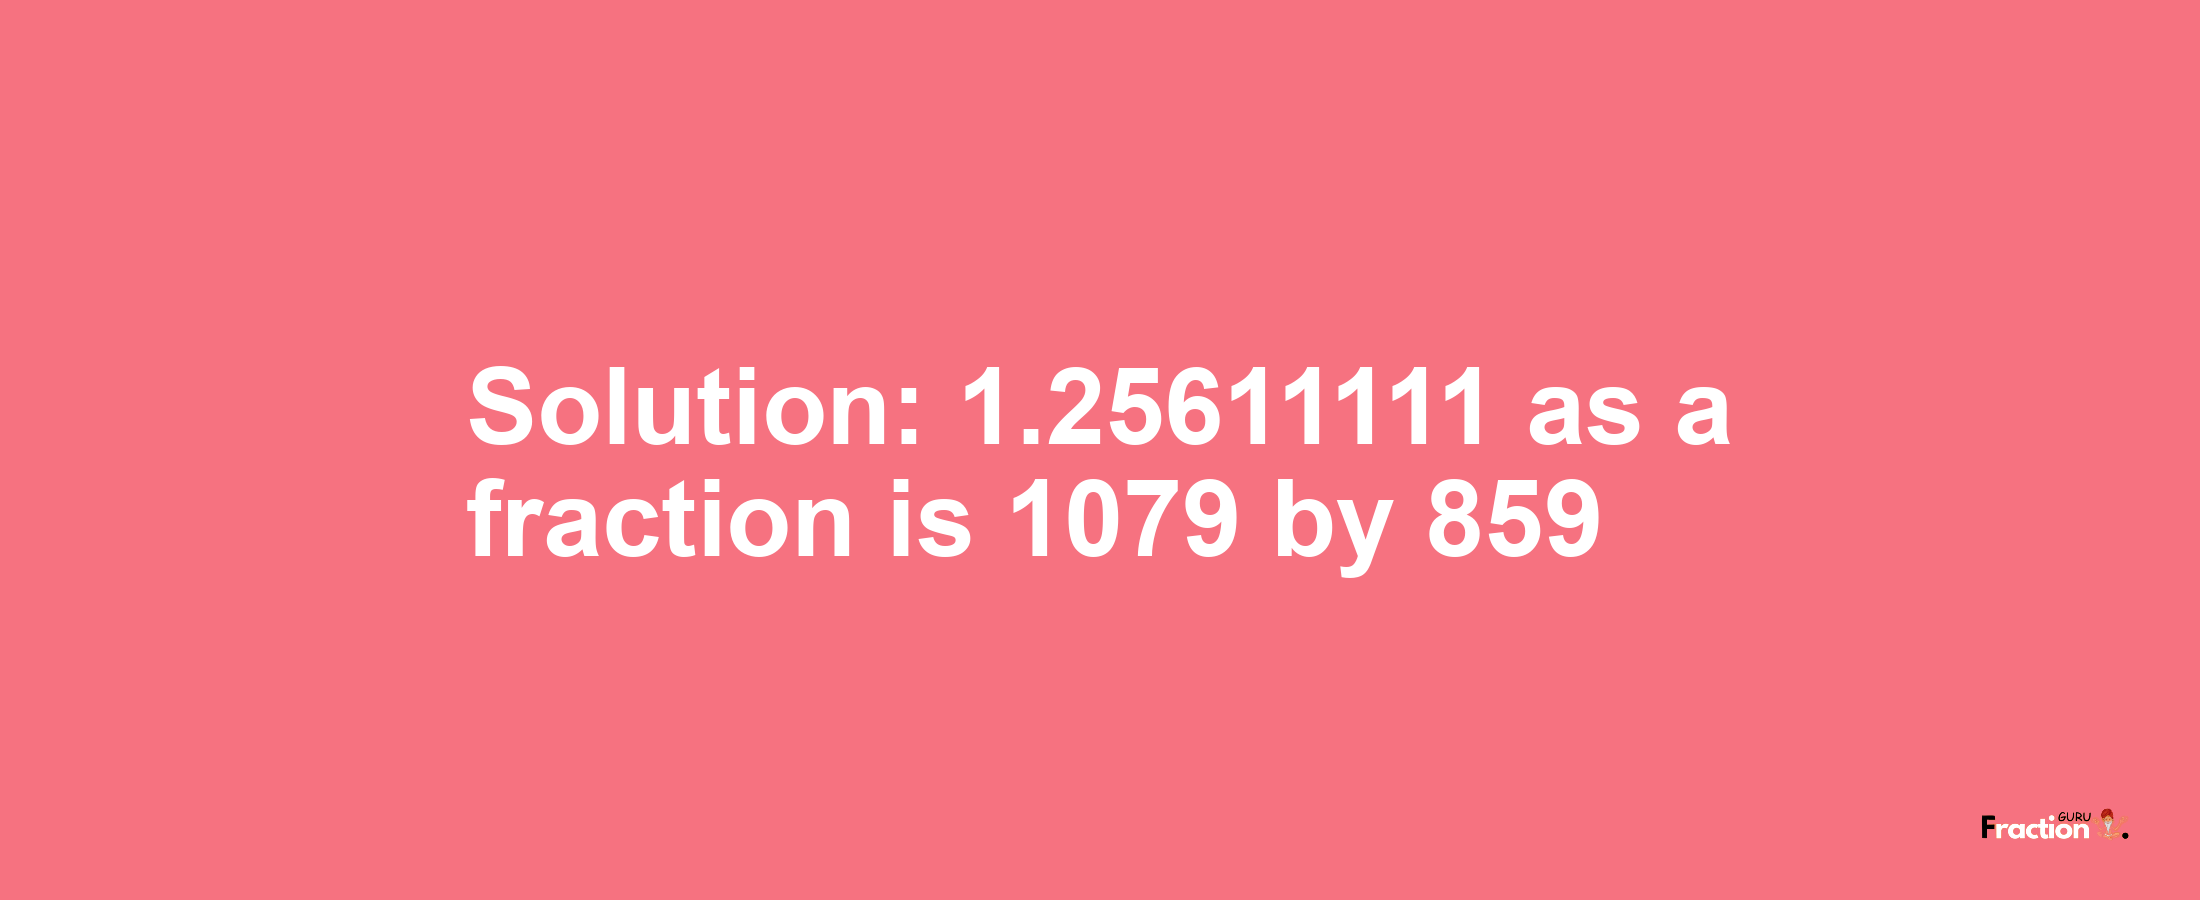 Solution:1.25611111 as a fraction is 1079/859